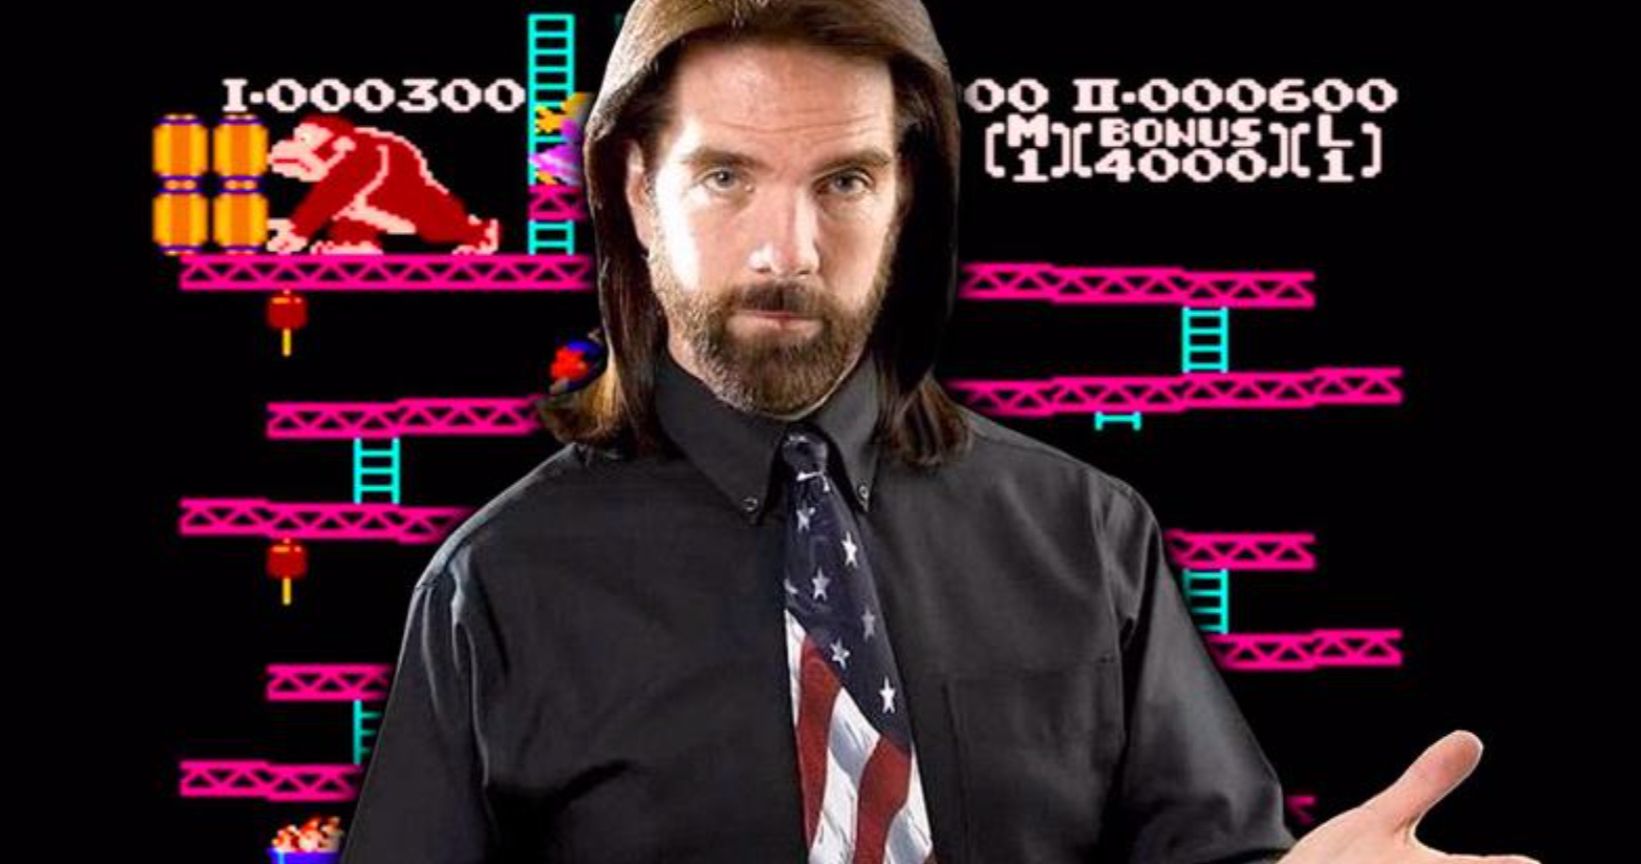 King of Kong Villain Billy Mitchell Gets His Guinness World Records Reinstated